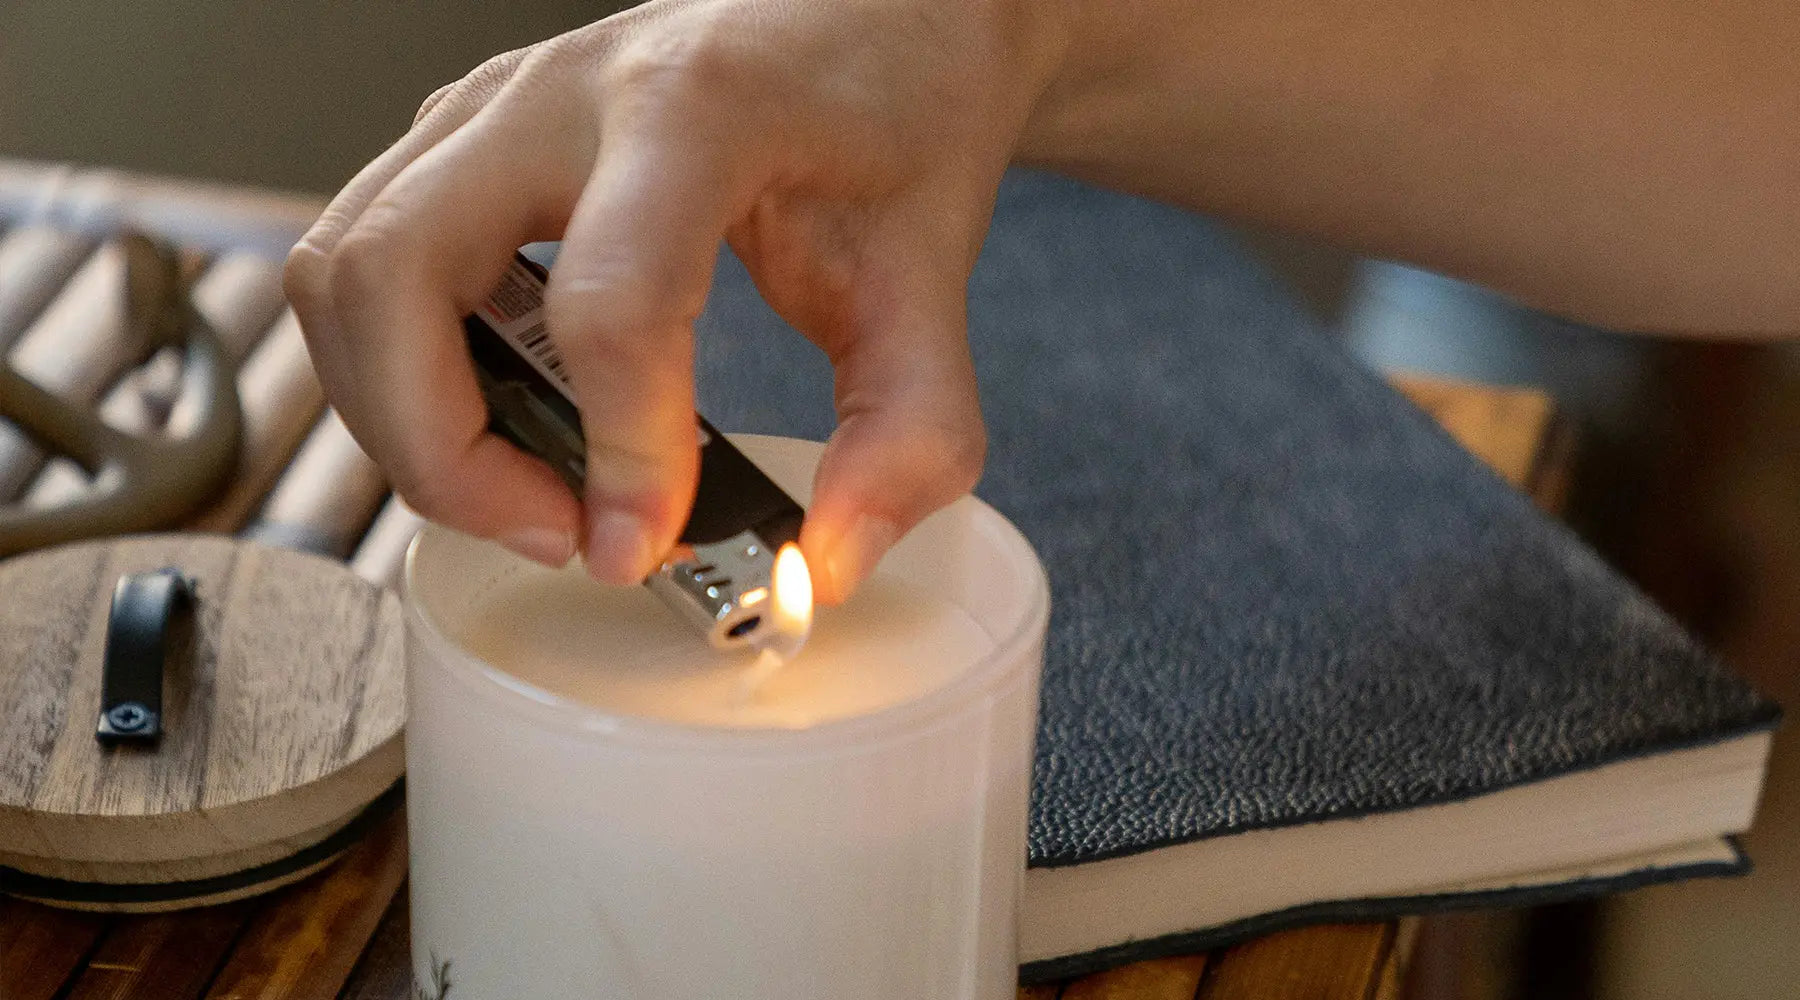 How to maintain a lighter?